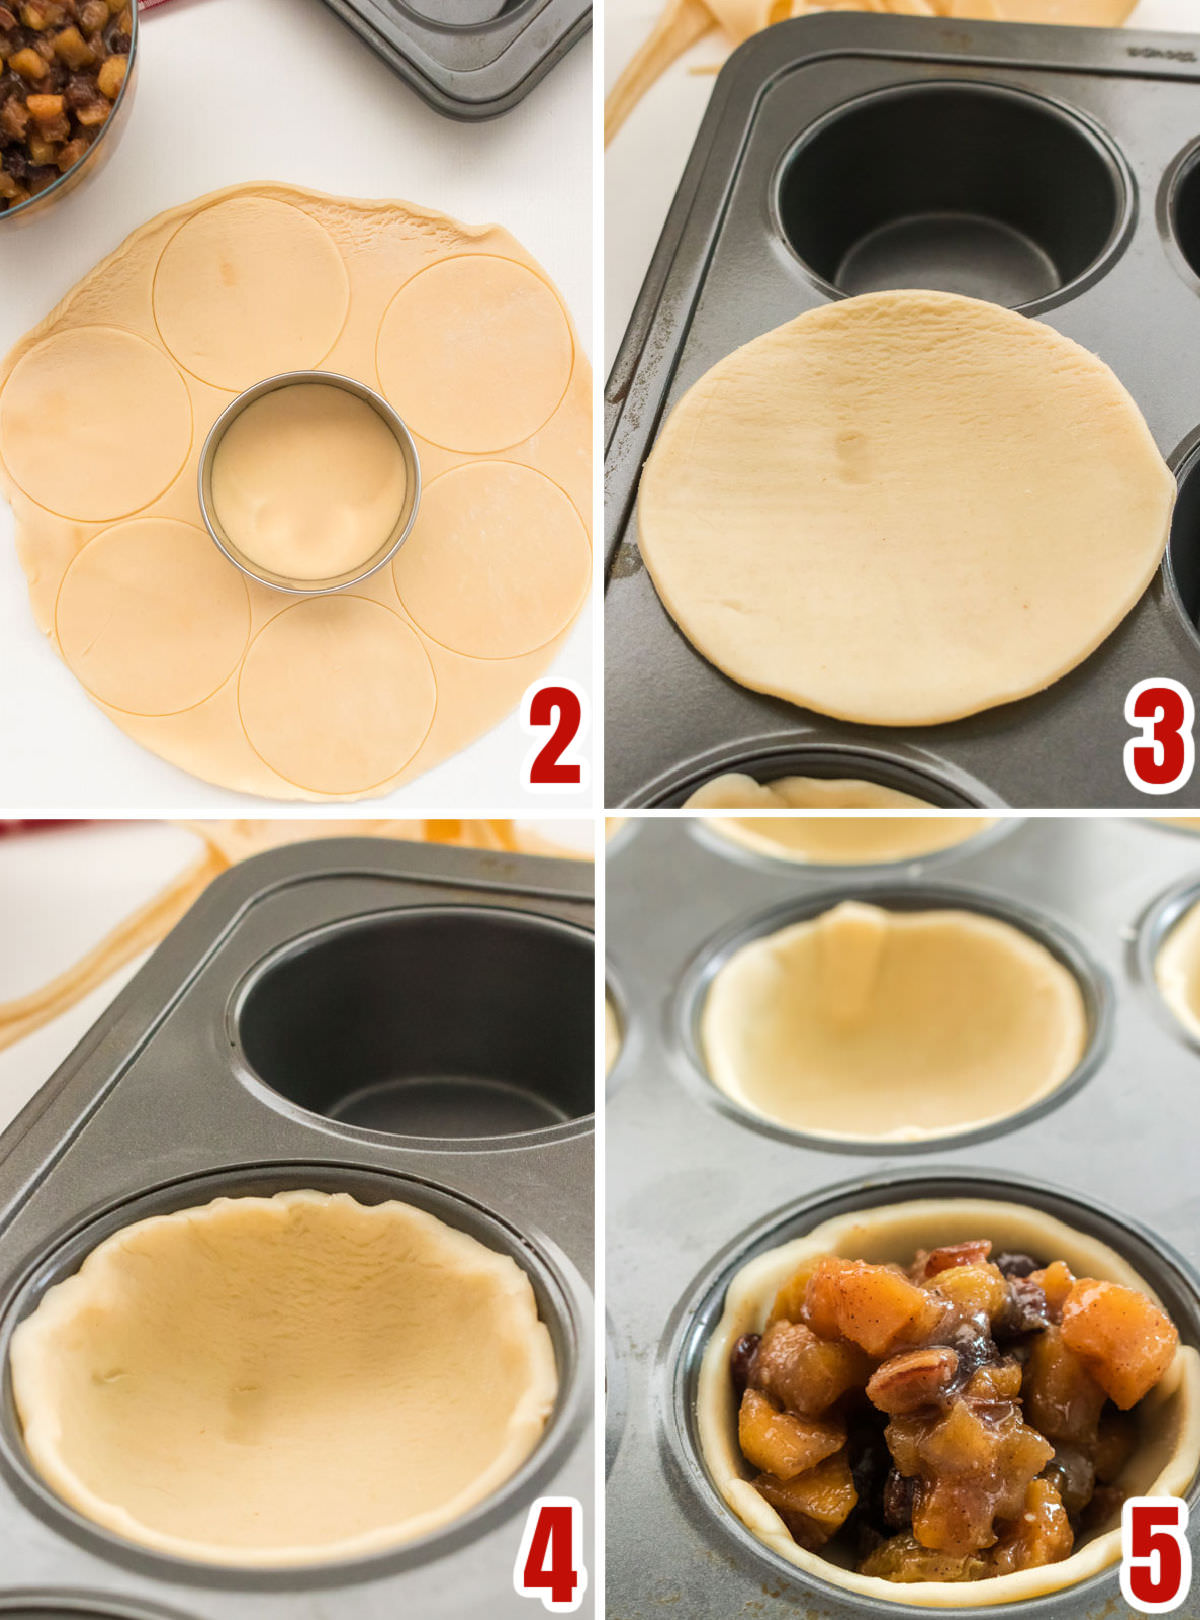 Collage image showing the steps for preparing the Pie Crust for the Mini Pies.